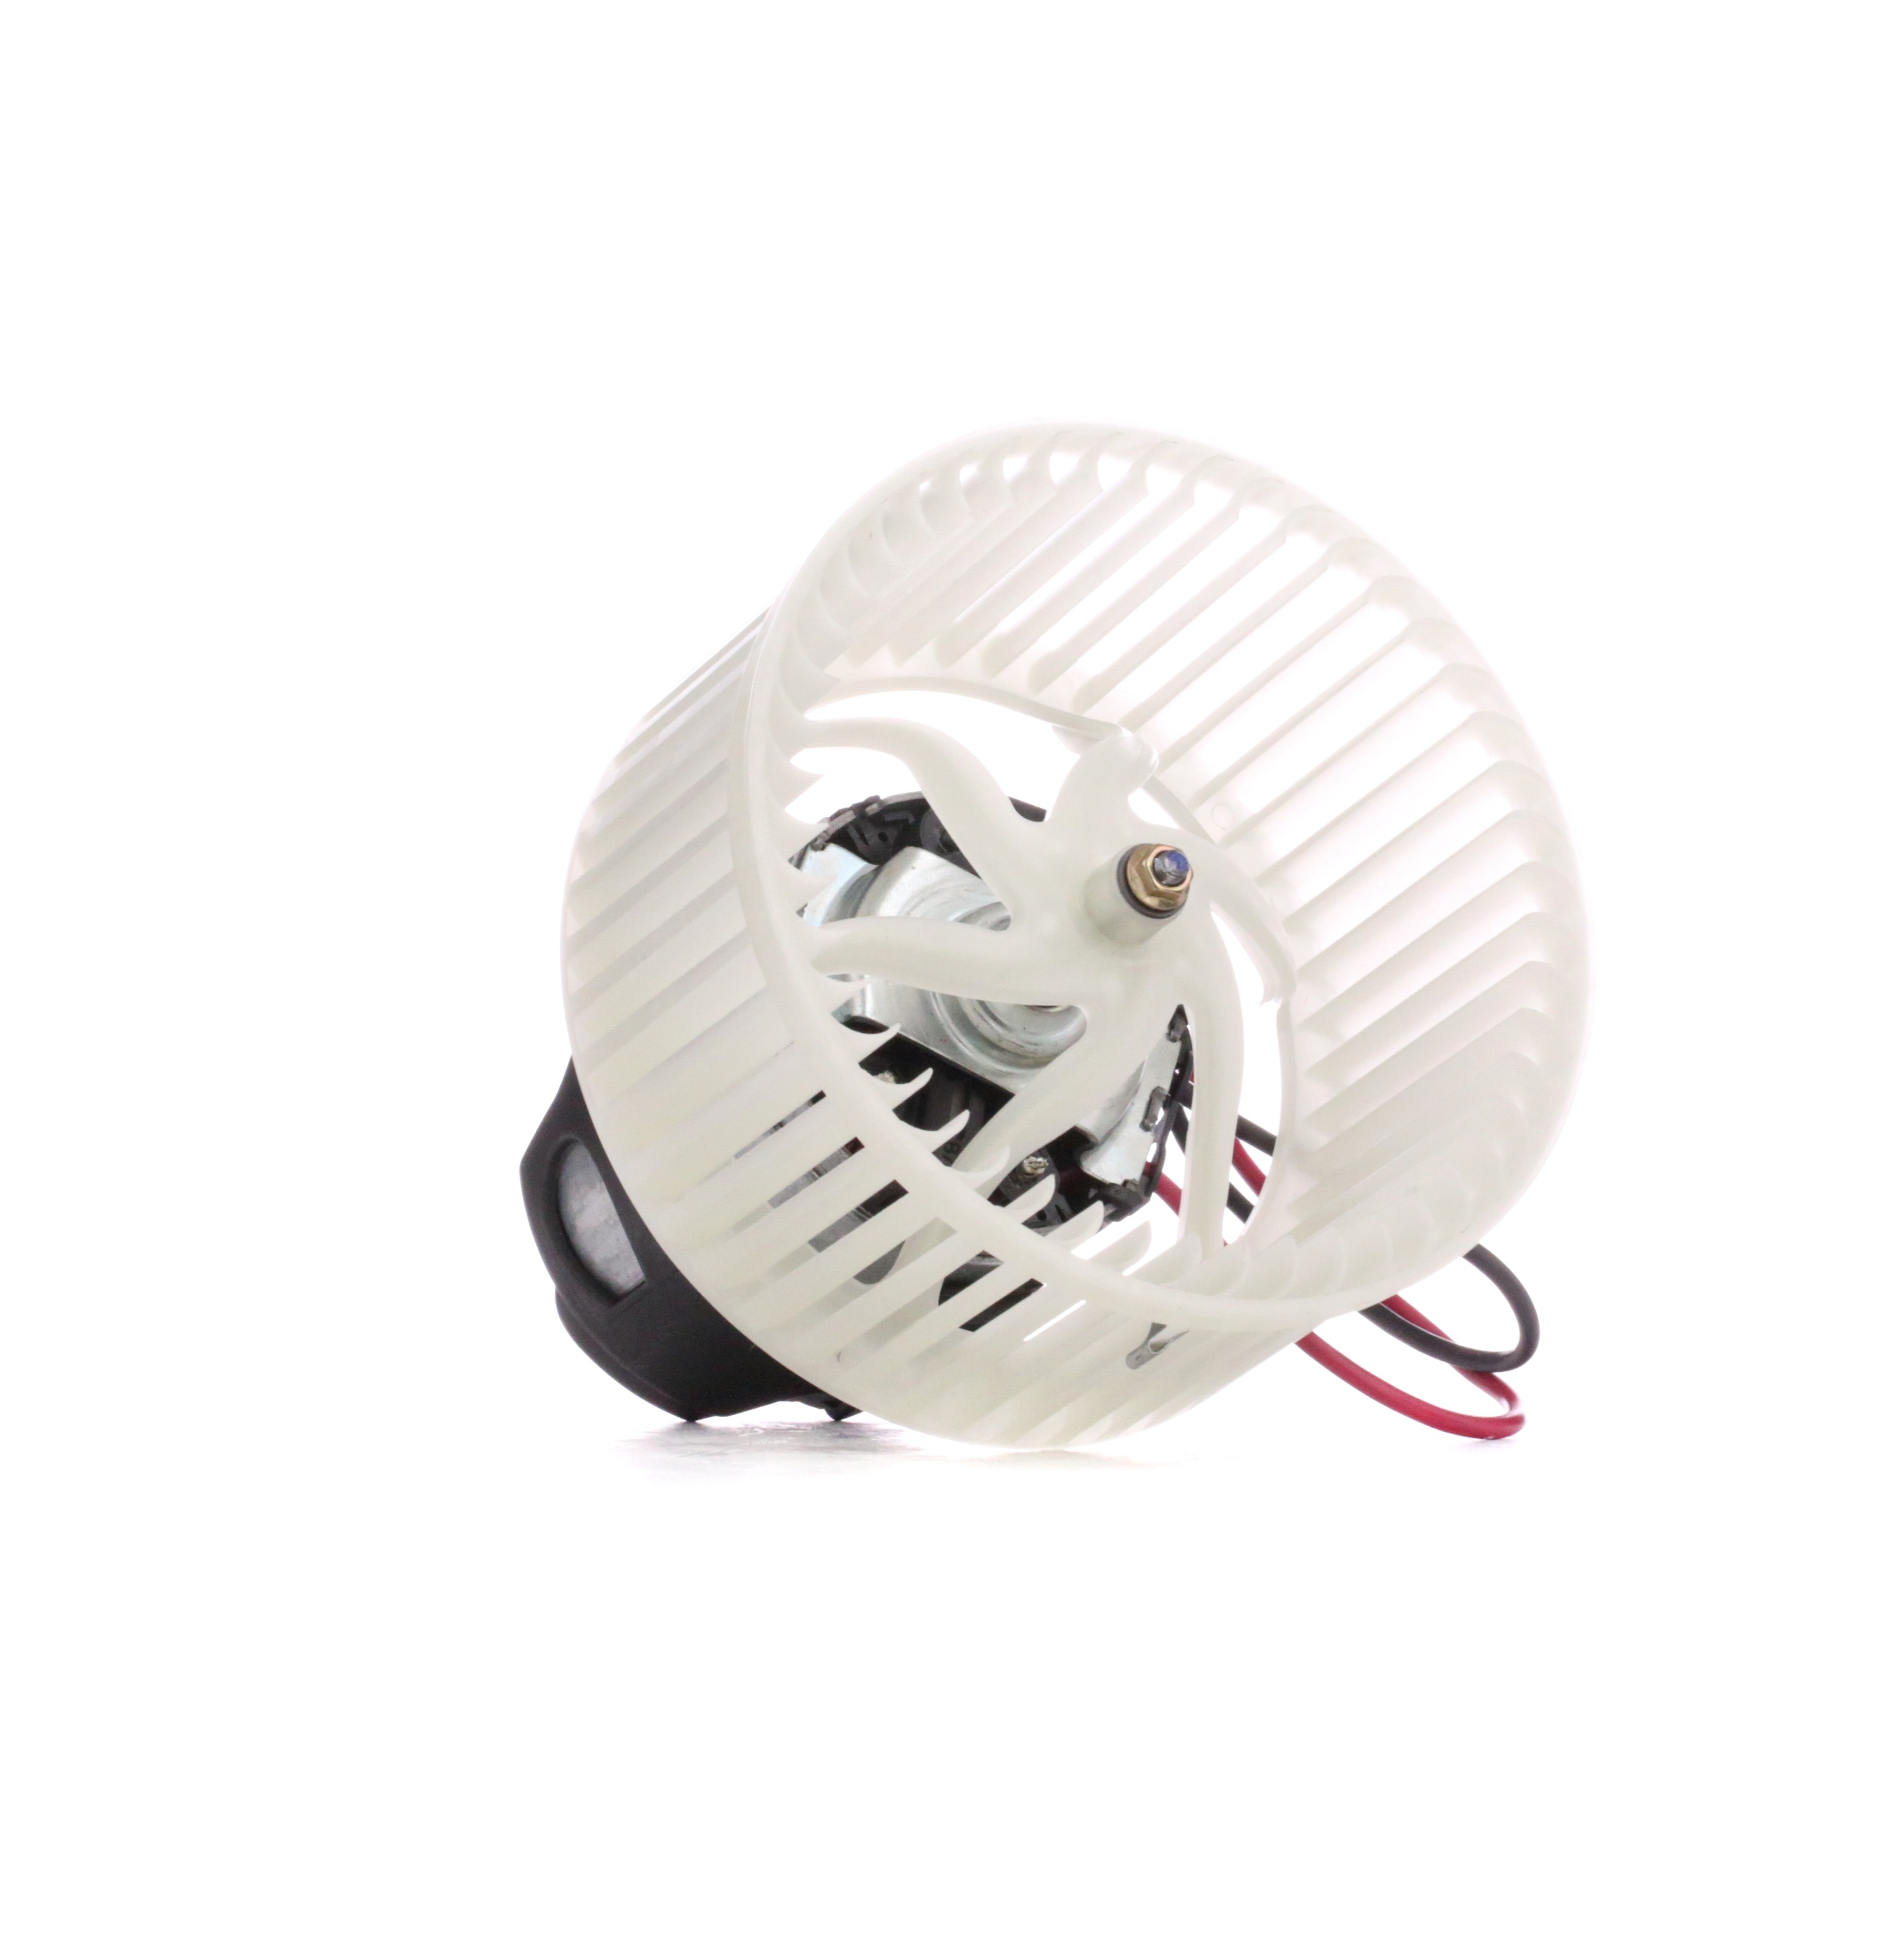 SKIB-0310173 STARK Heater blower motor CHEVROLET for vehicles with air conditioning, for left-hand drive vehicles